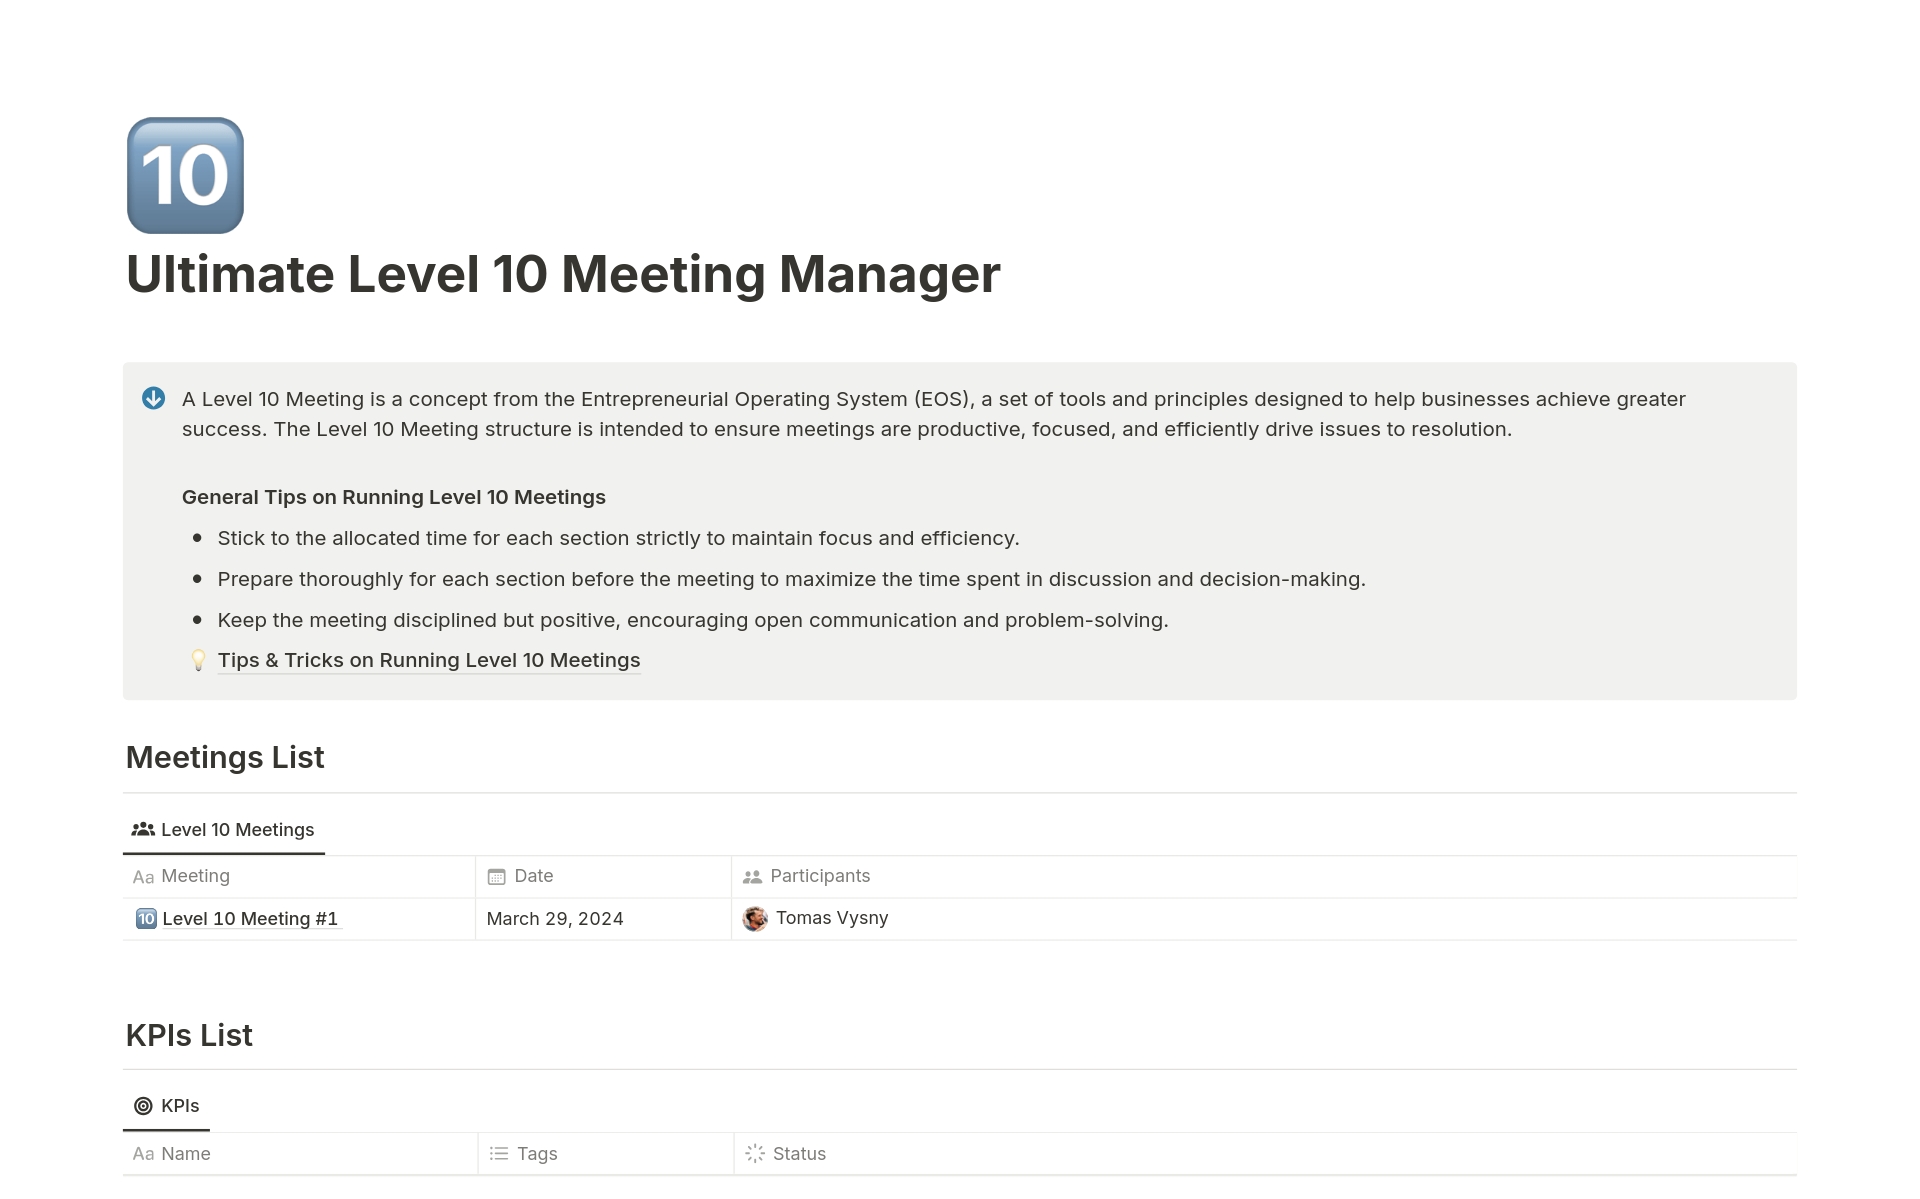 Transform meetings with "Ultimate Level 10 Meeting Manager" - your key to productive, focused EOS meetings. Unlock best practices, manage KPIs & goals, and streamline decision-making. Elevate your team's efficiency and alignment today.
